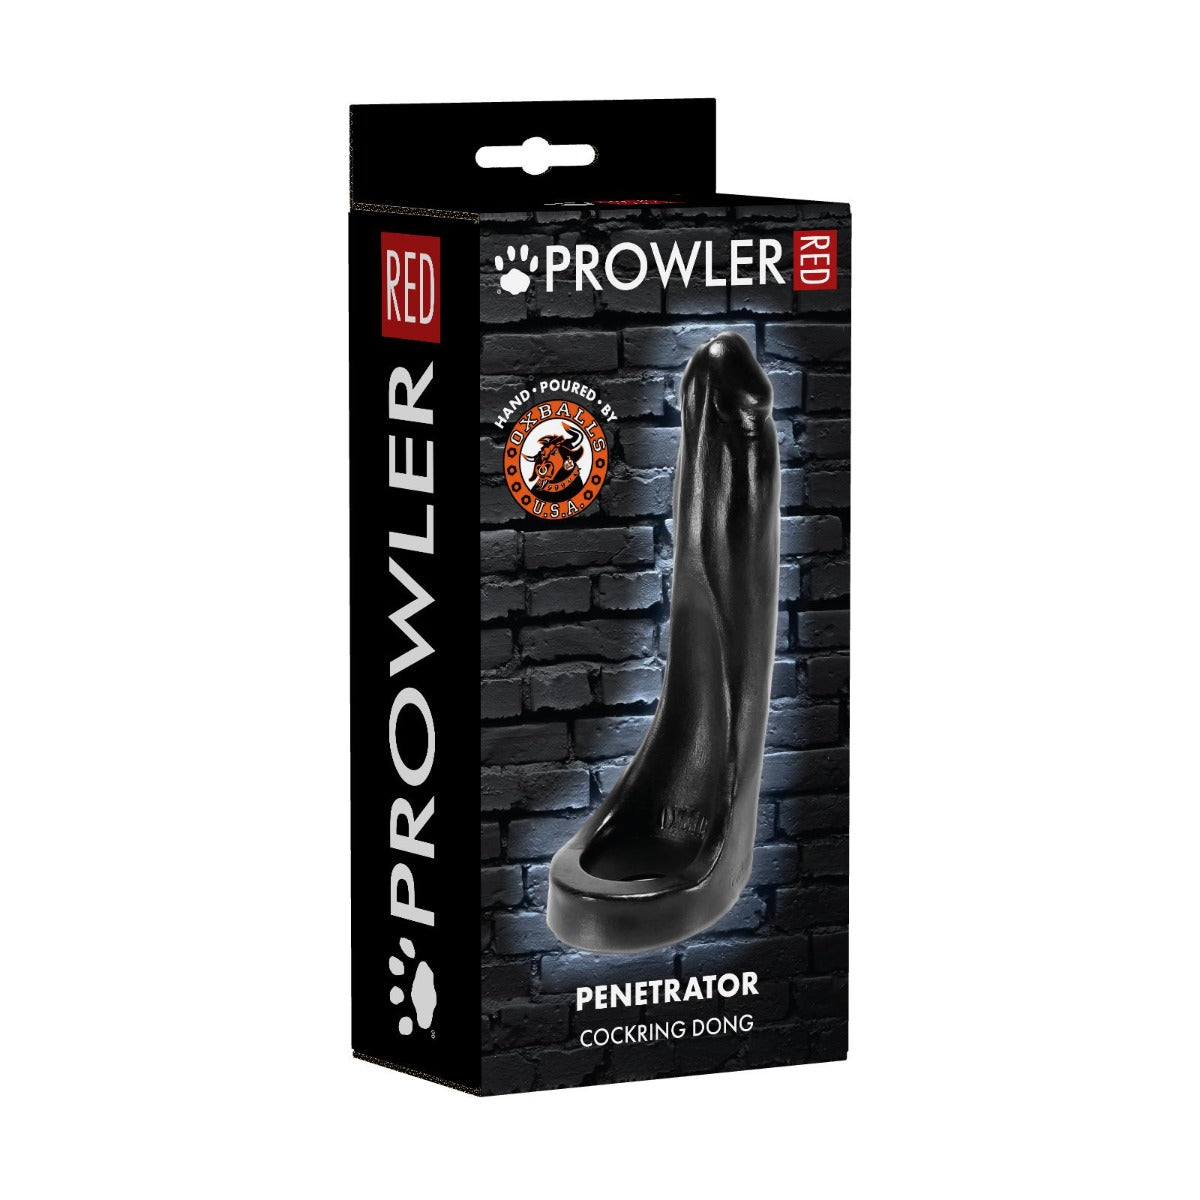 Prowler RED Penetrator By Oxballs (7020814565540)